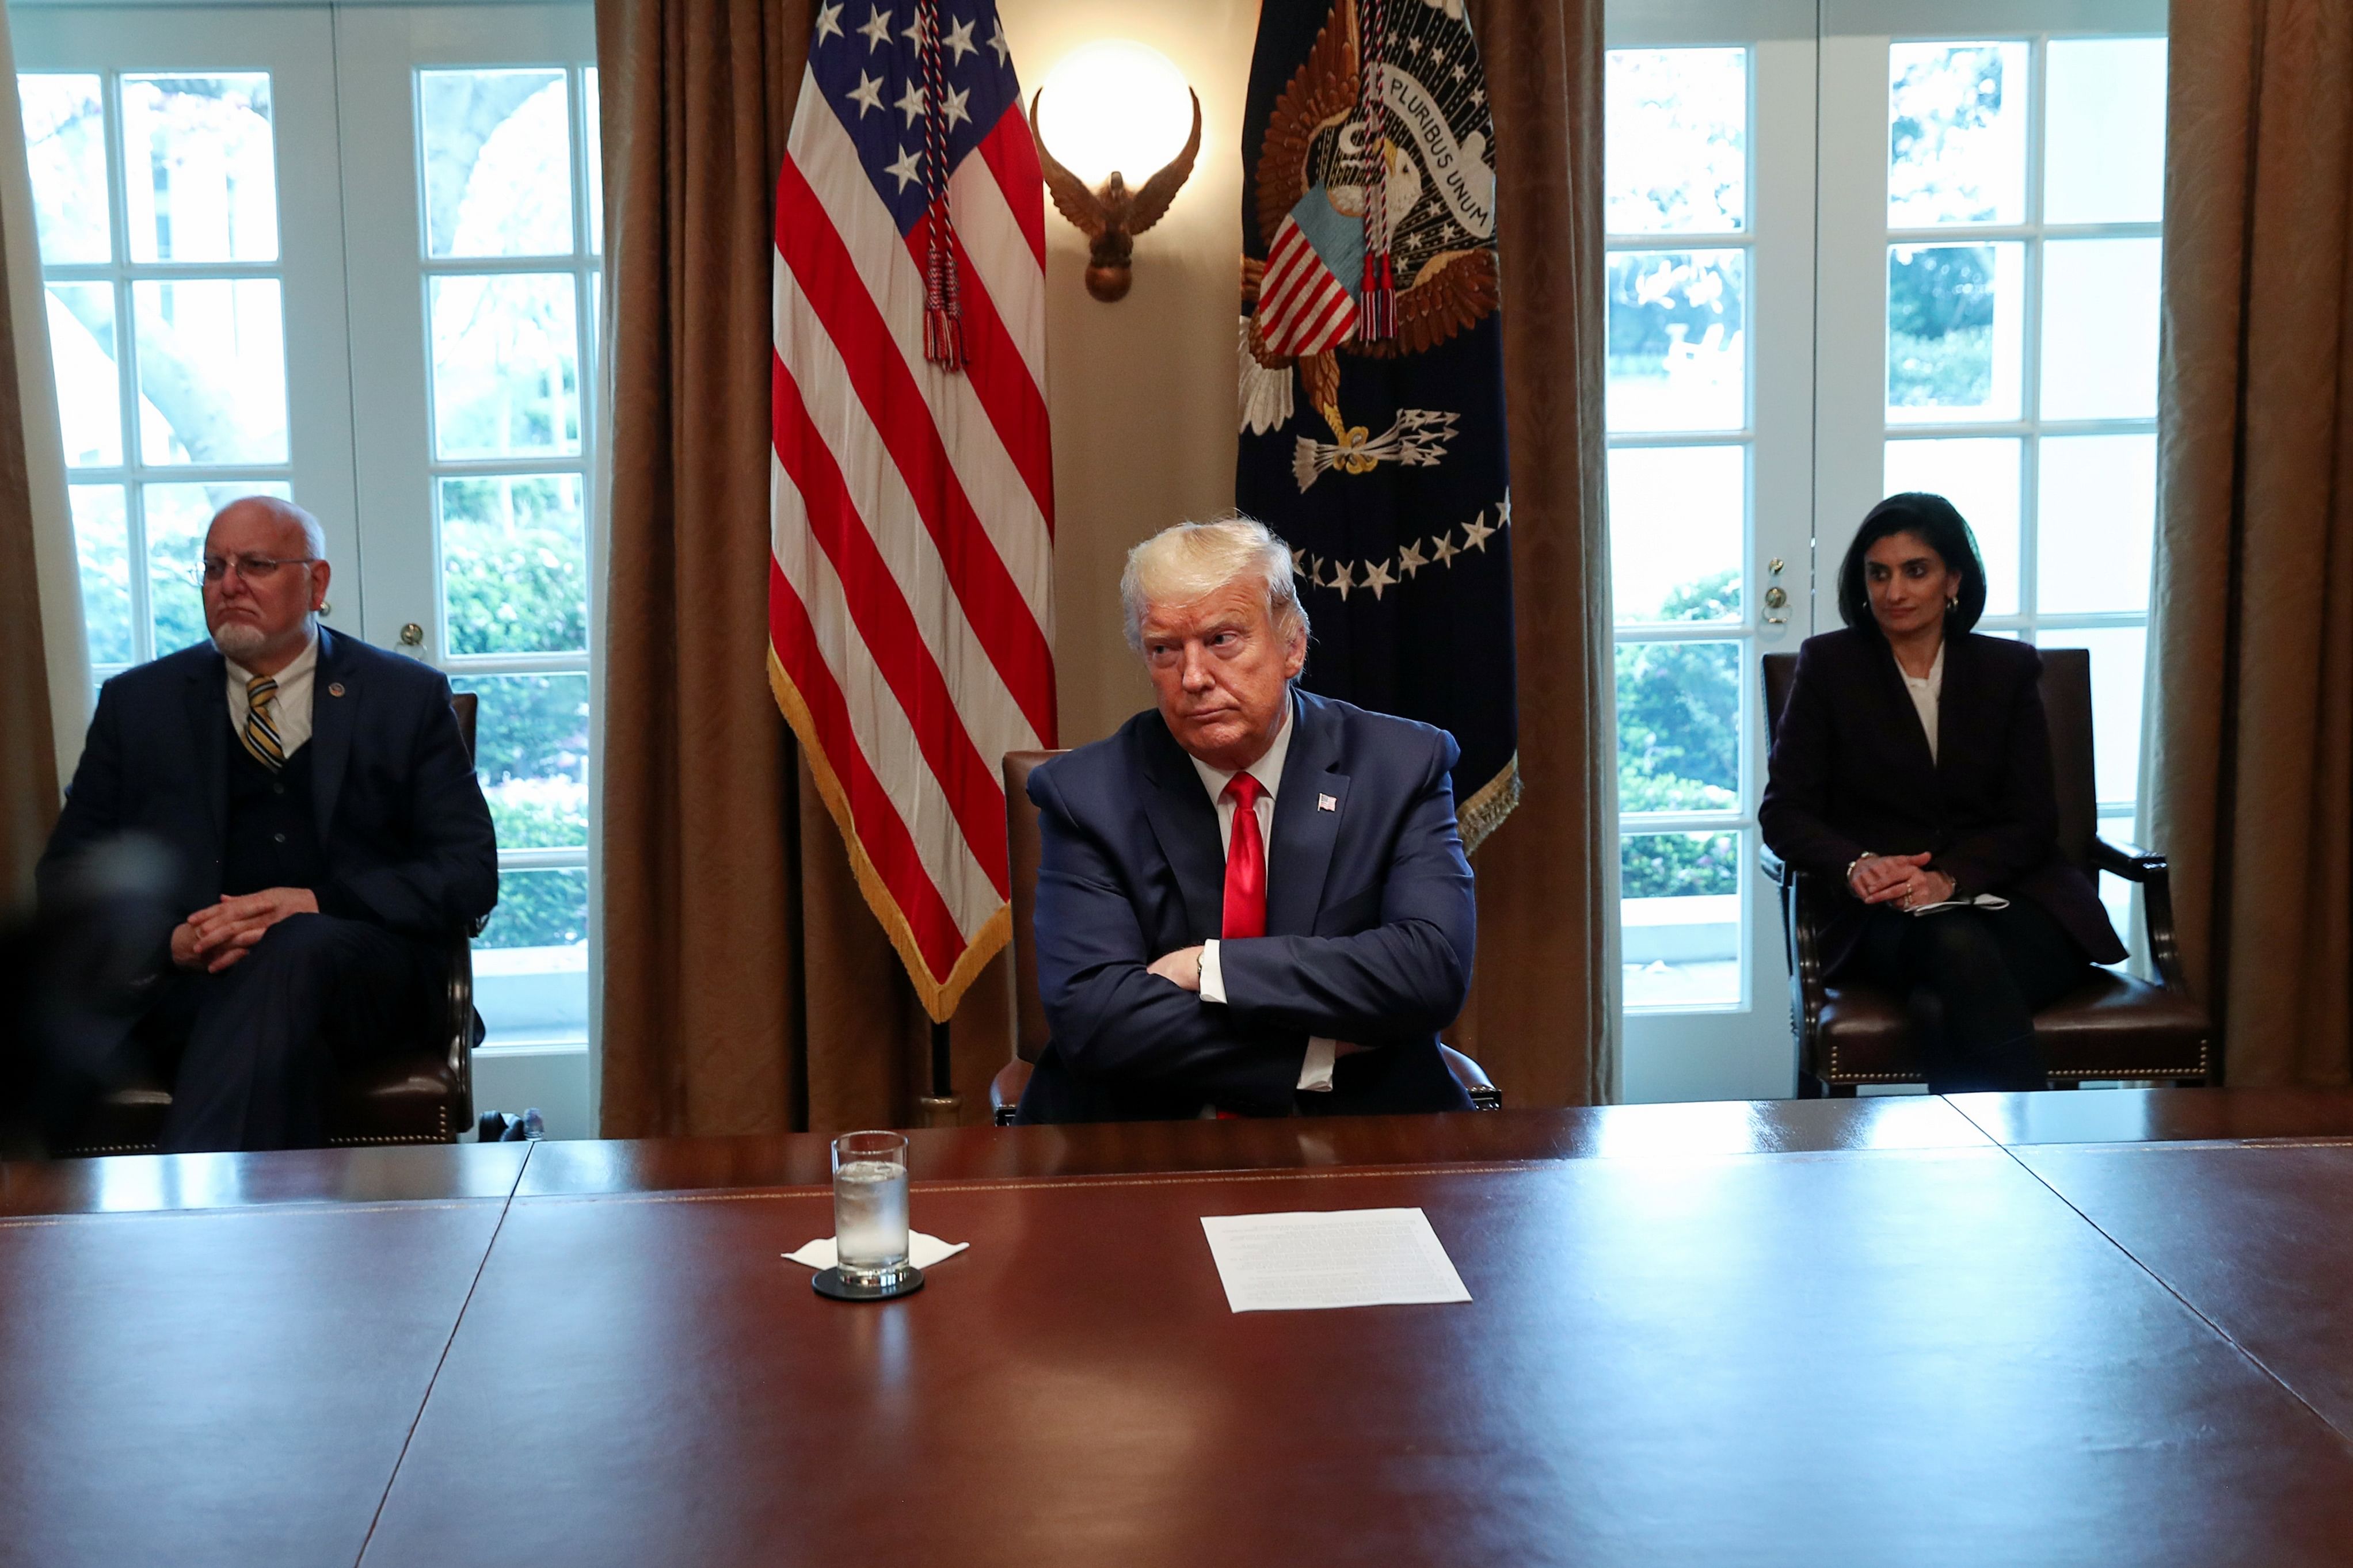 U.S. President Donald Trump meets with representatives of nurses organizations on coronavirus response in the Cabinet Room of the White House in Washington. (Credit: Reuters)